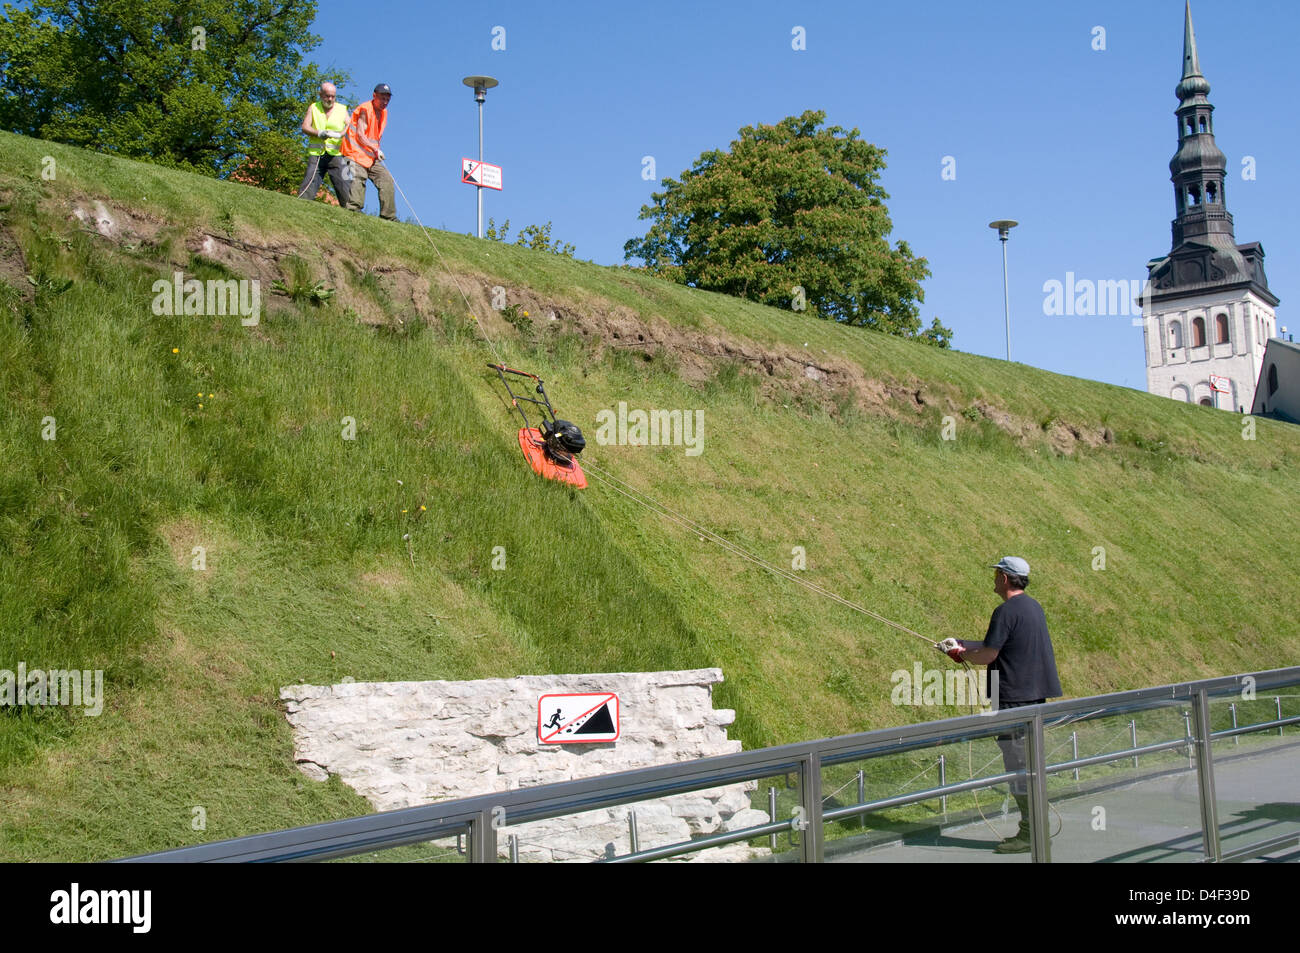 Council gardeners mowing a steep slope by attaching a Flymo with a rope near Freedom Square in Tallinn Old Town, Tallinn, Estonia Stock Photo